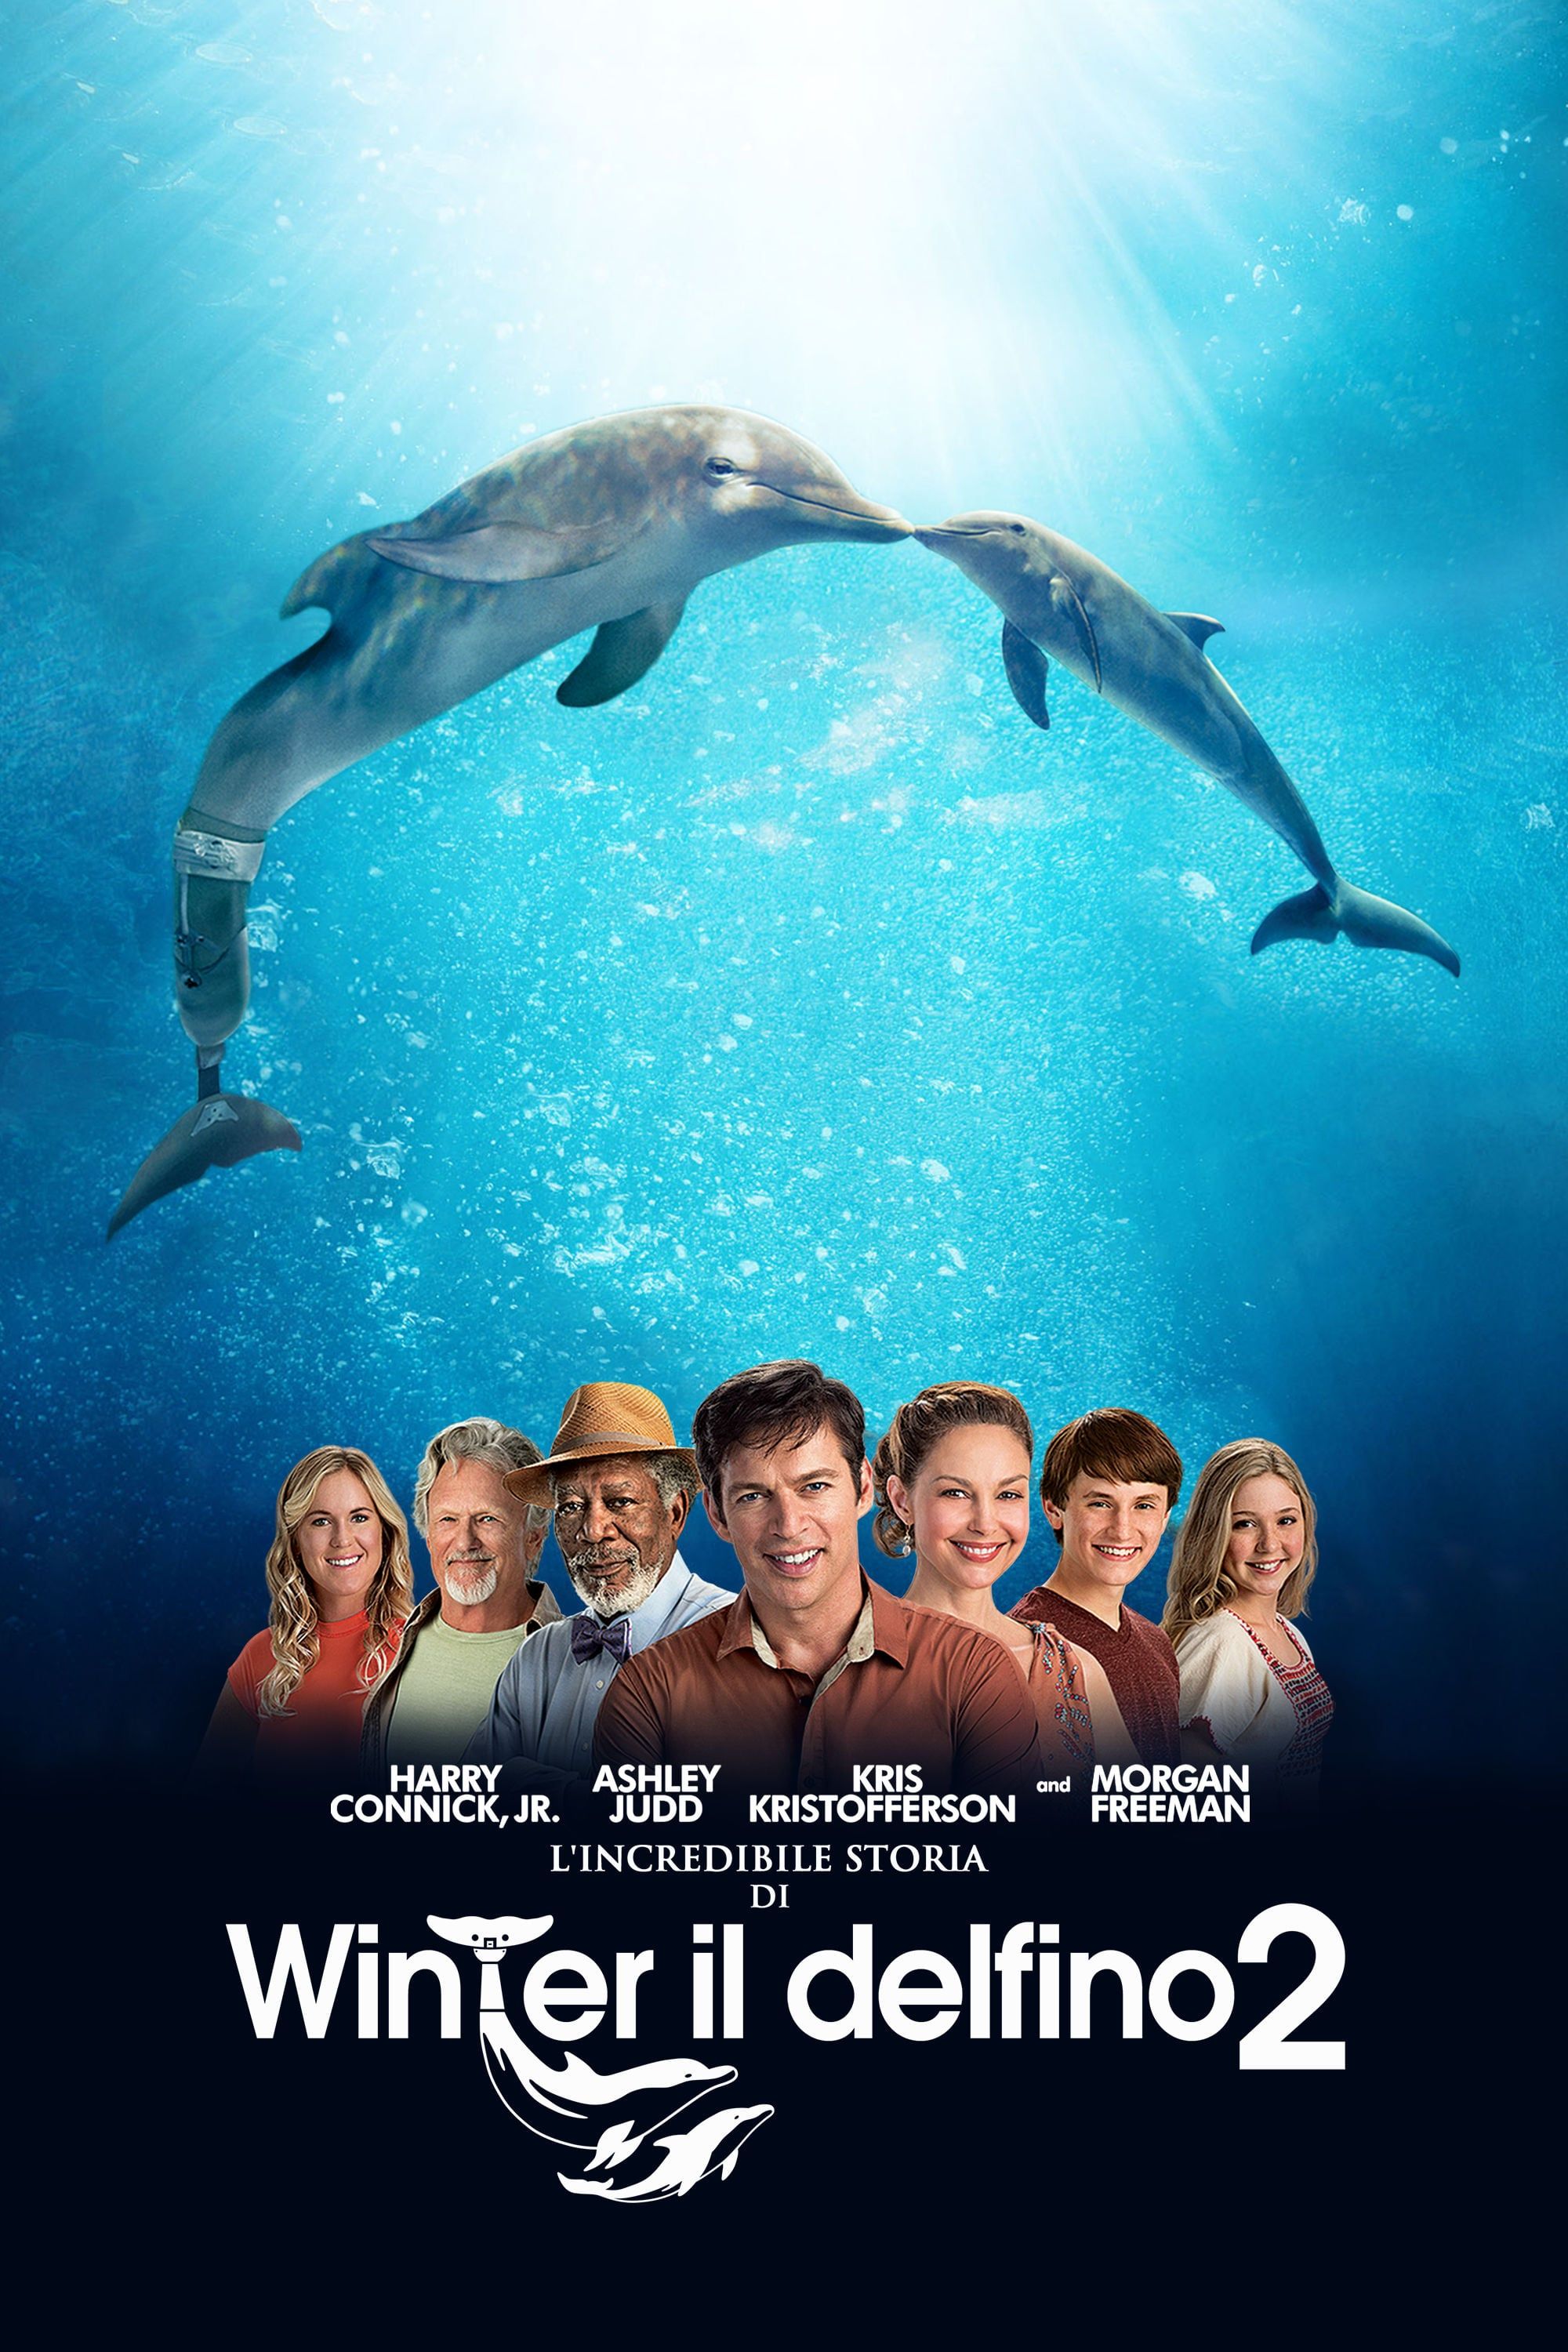 Watch Dolphin Tale 2 Full Movie Online, Release Date, Trailer, Cast and Songs